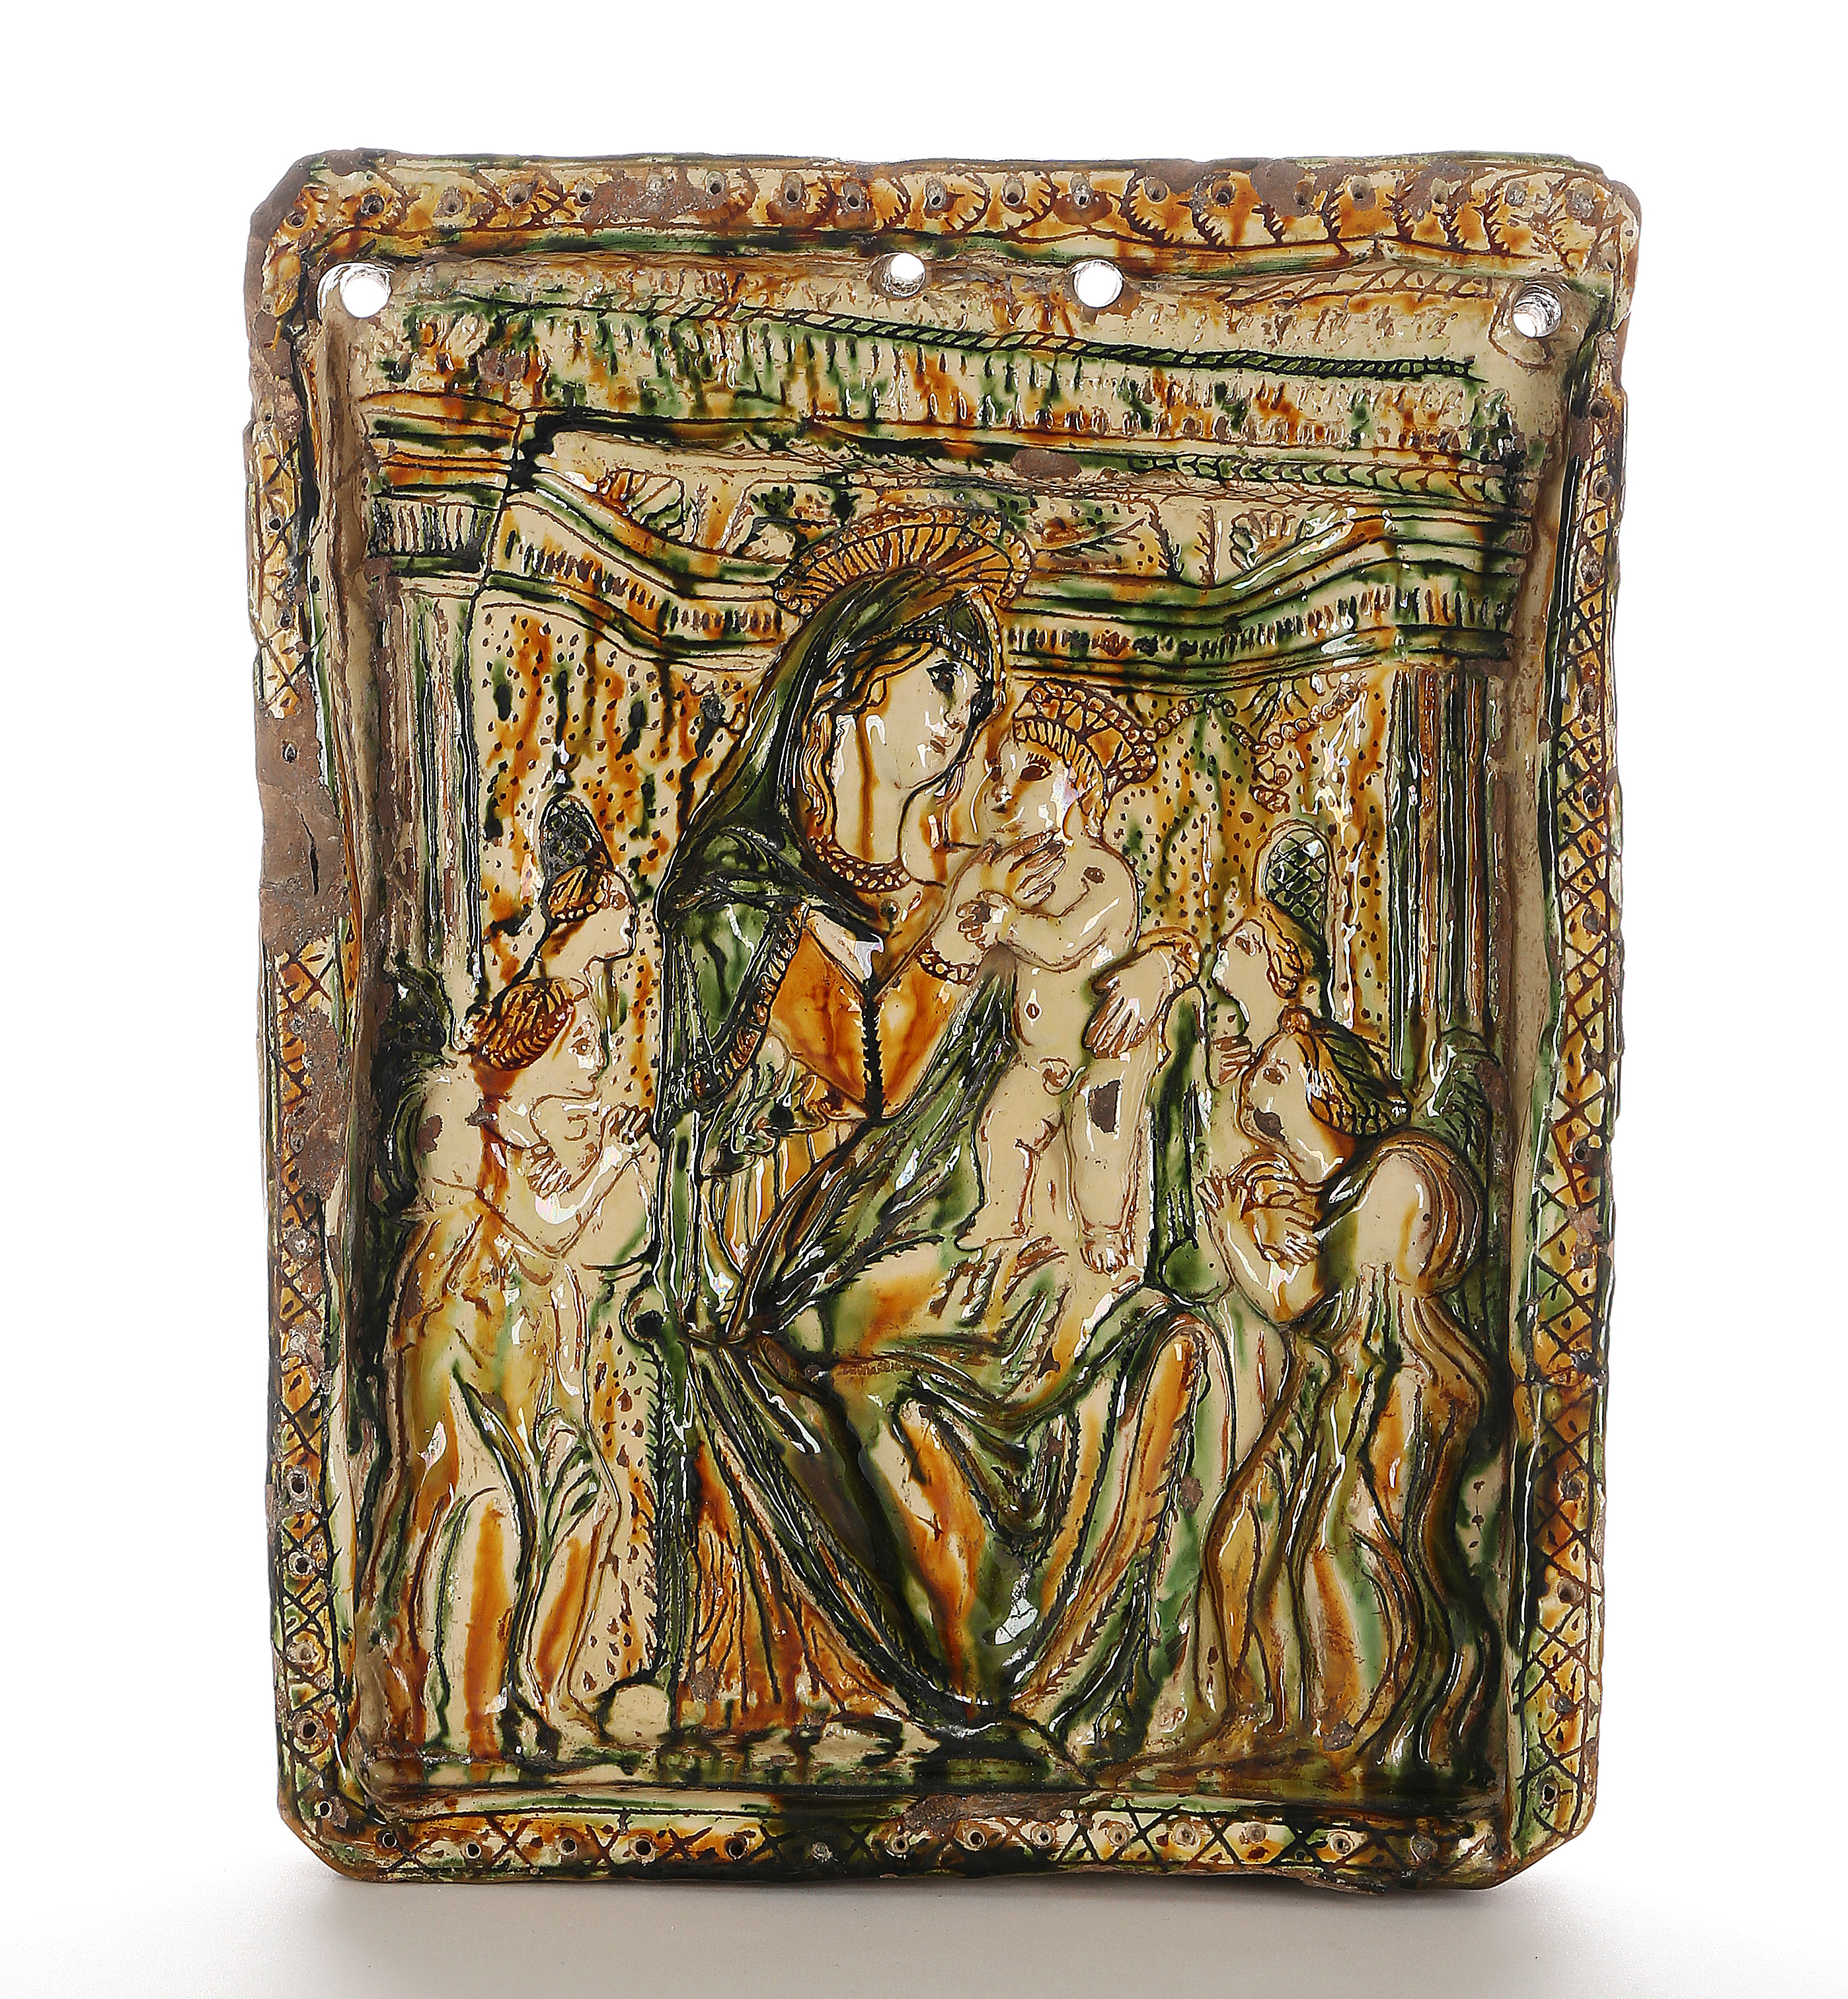 AN INCISED SLIPWARE PLAQUE OF THE MADONNA AND CHILD